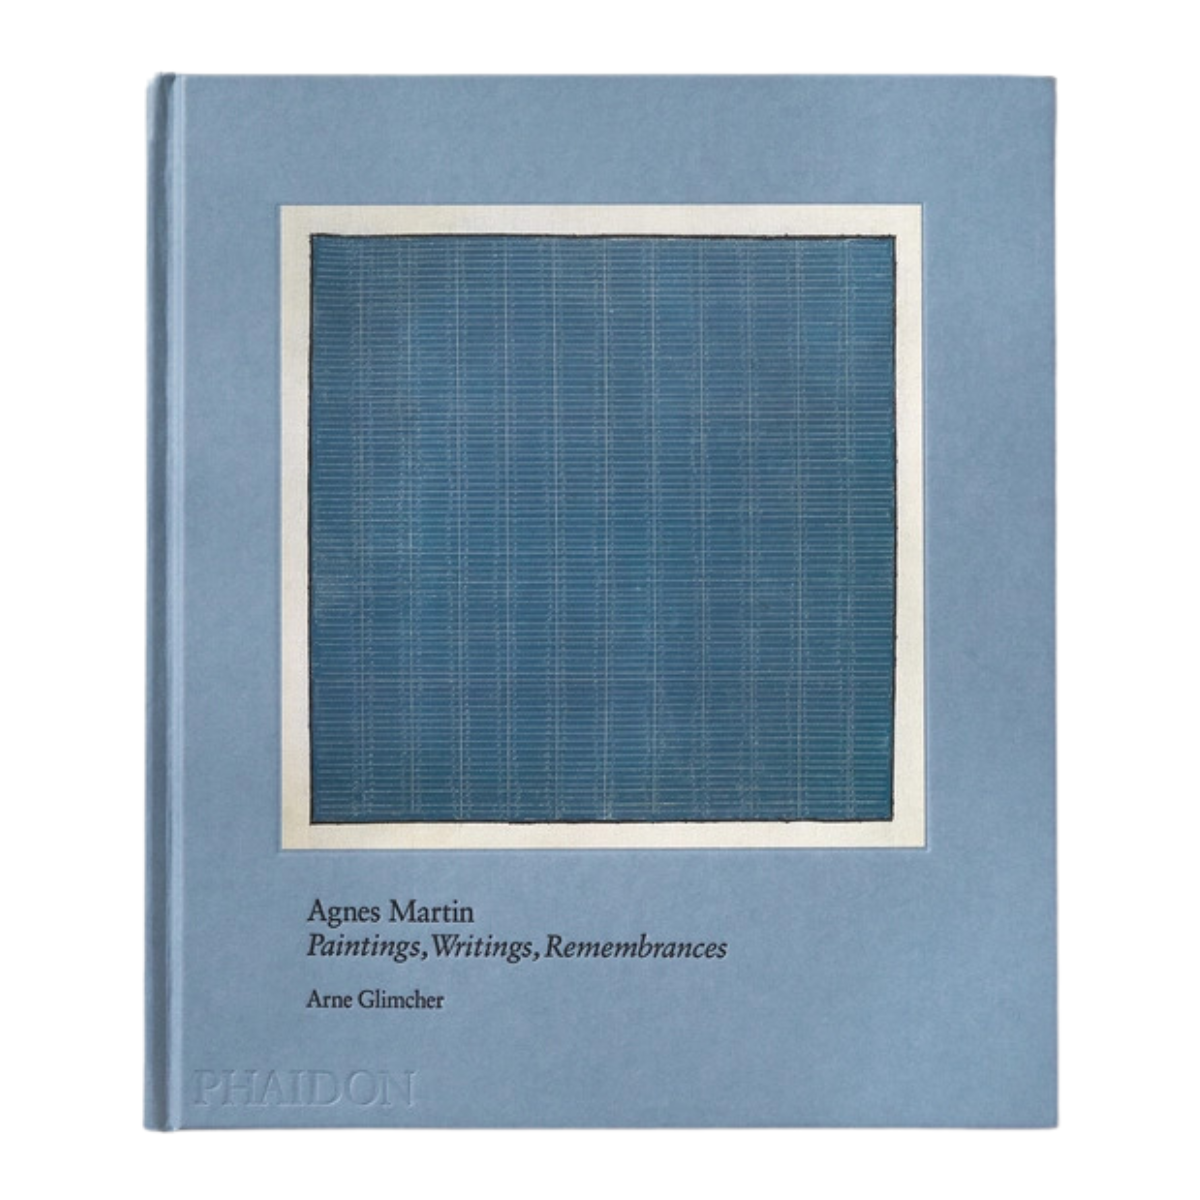 "Agnes Martin: Painting, Writings, Remembrances"